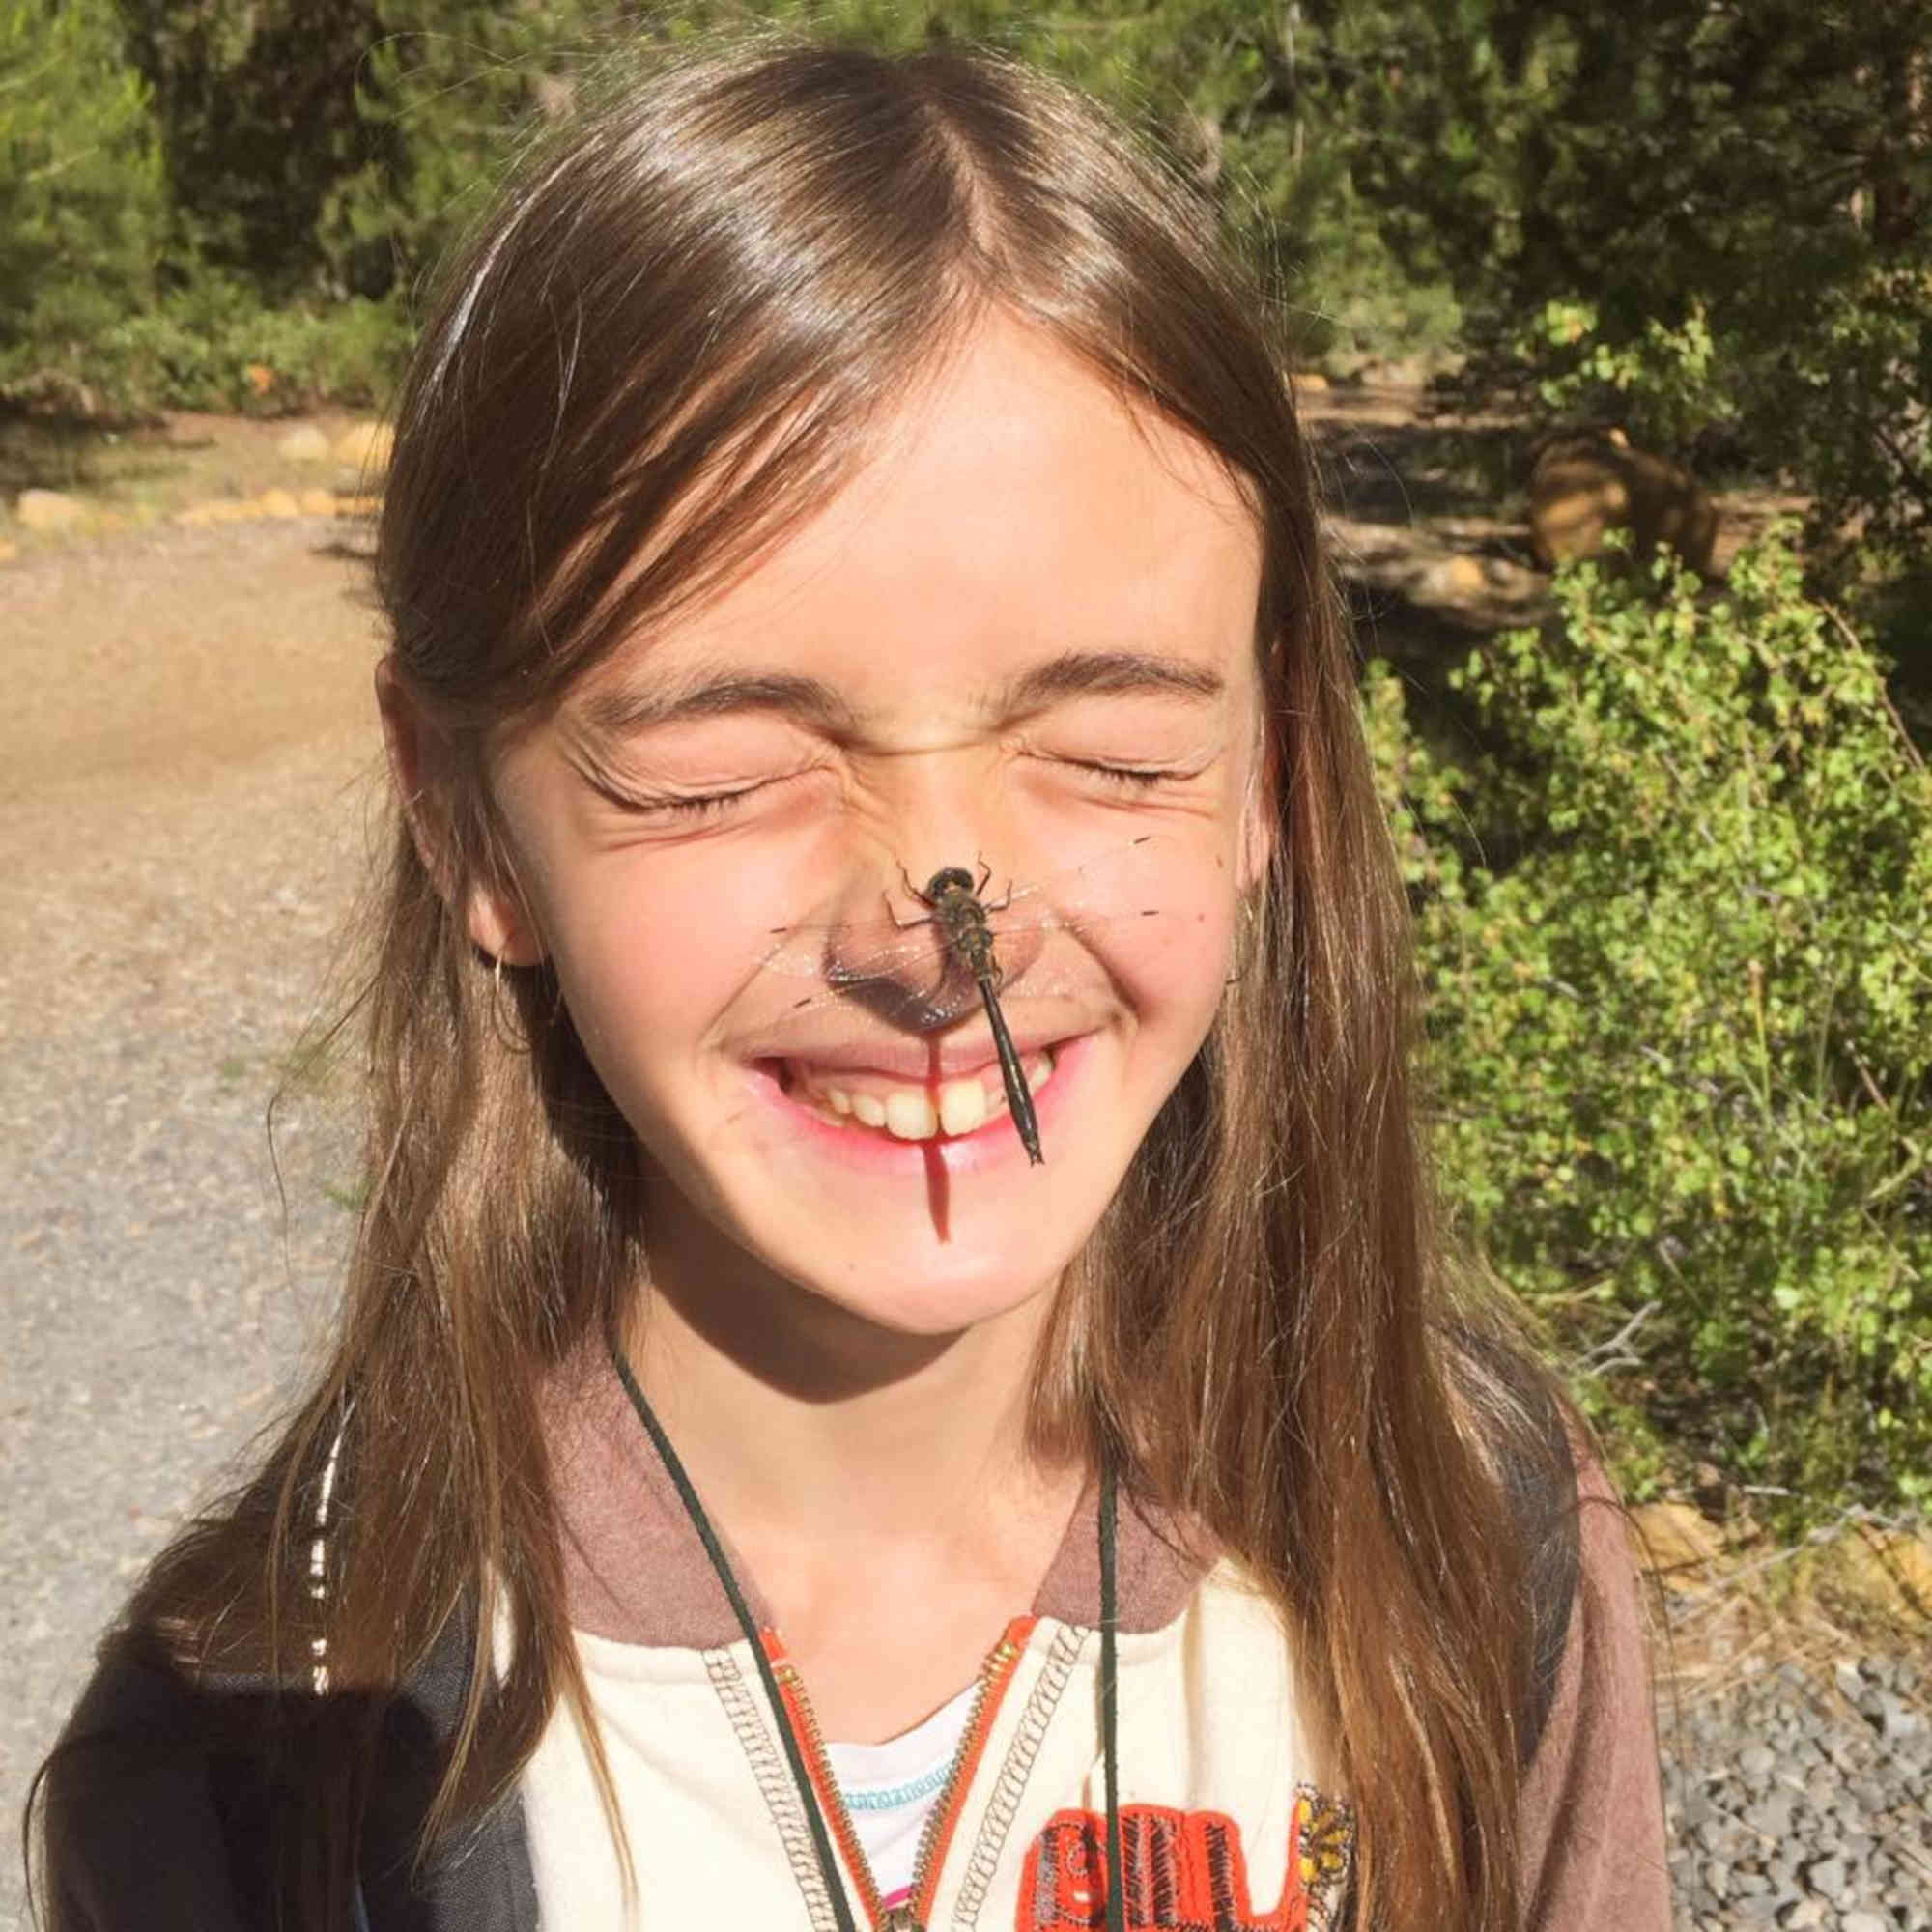 Dragon Fly landed on girls nose